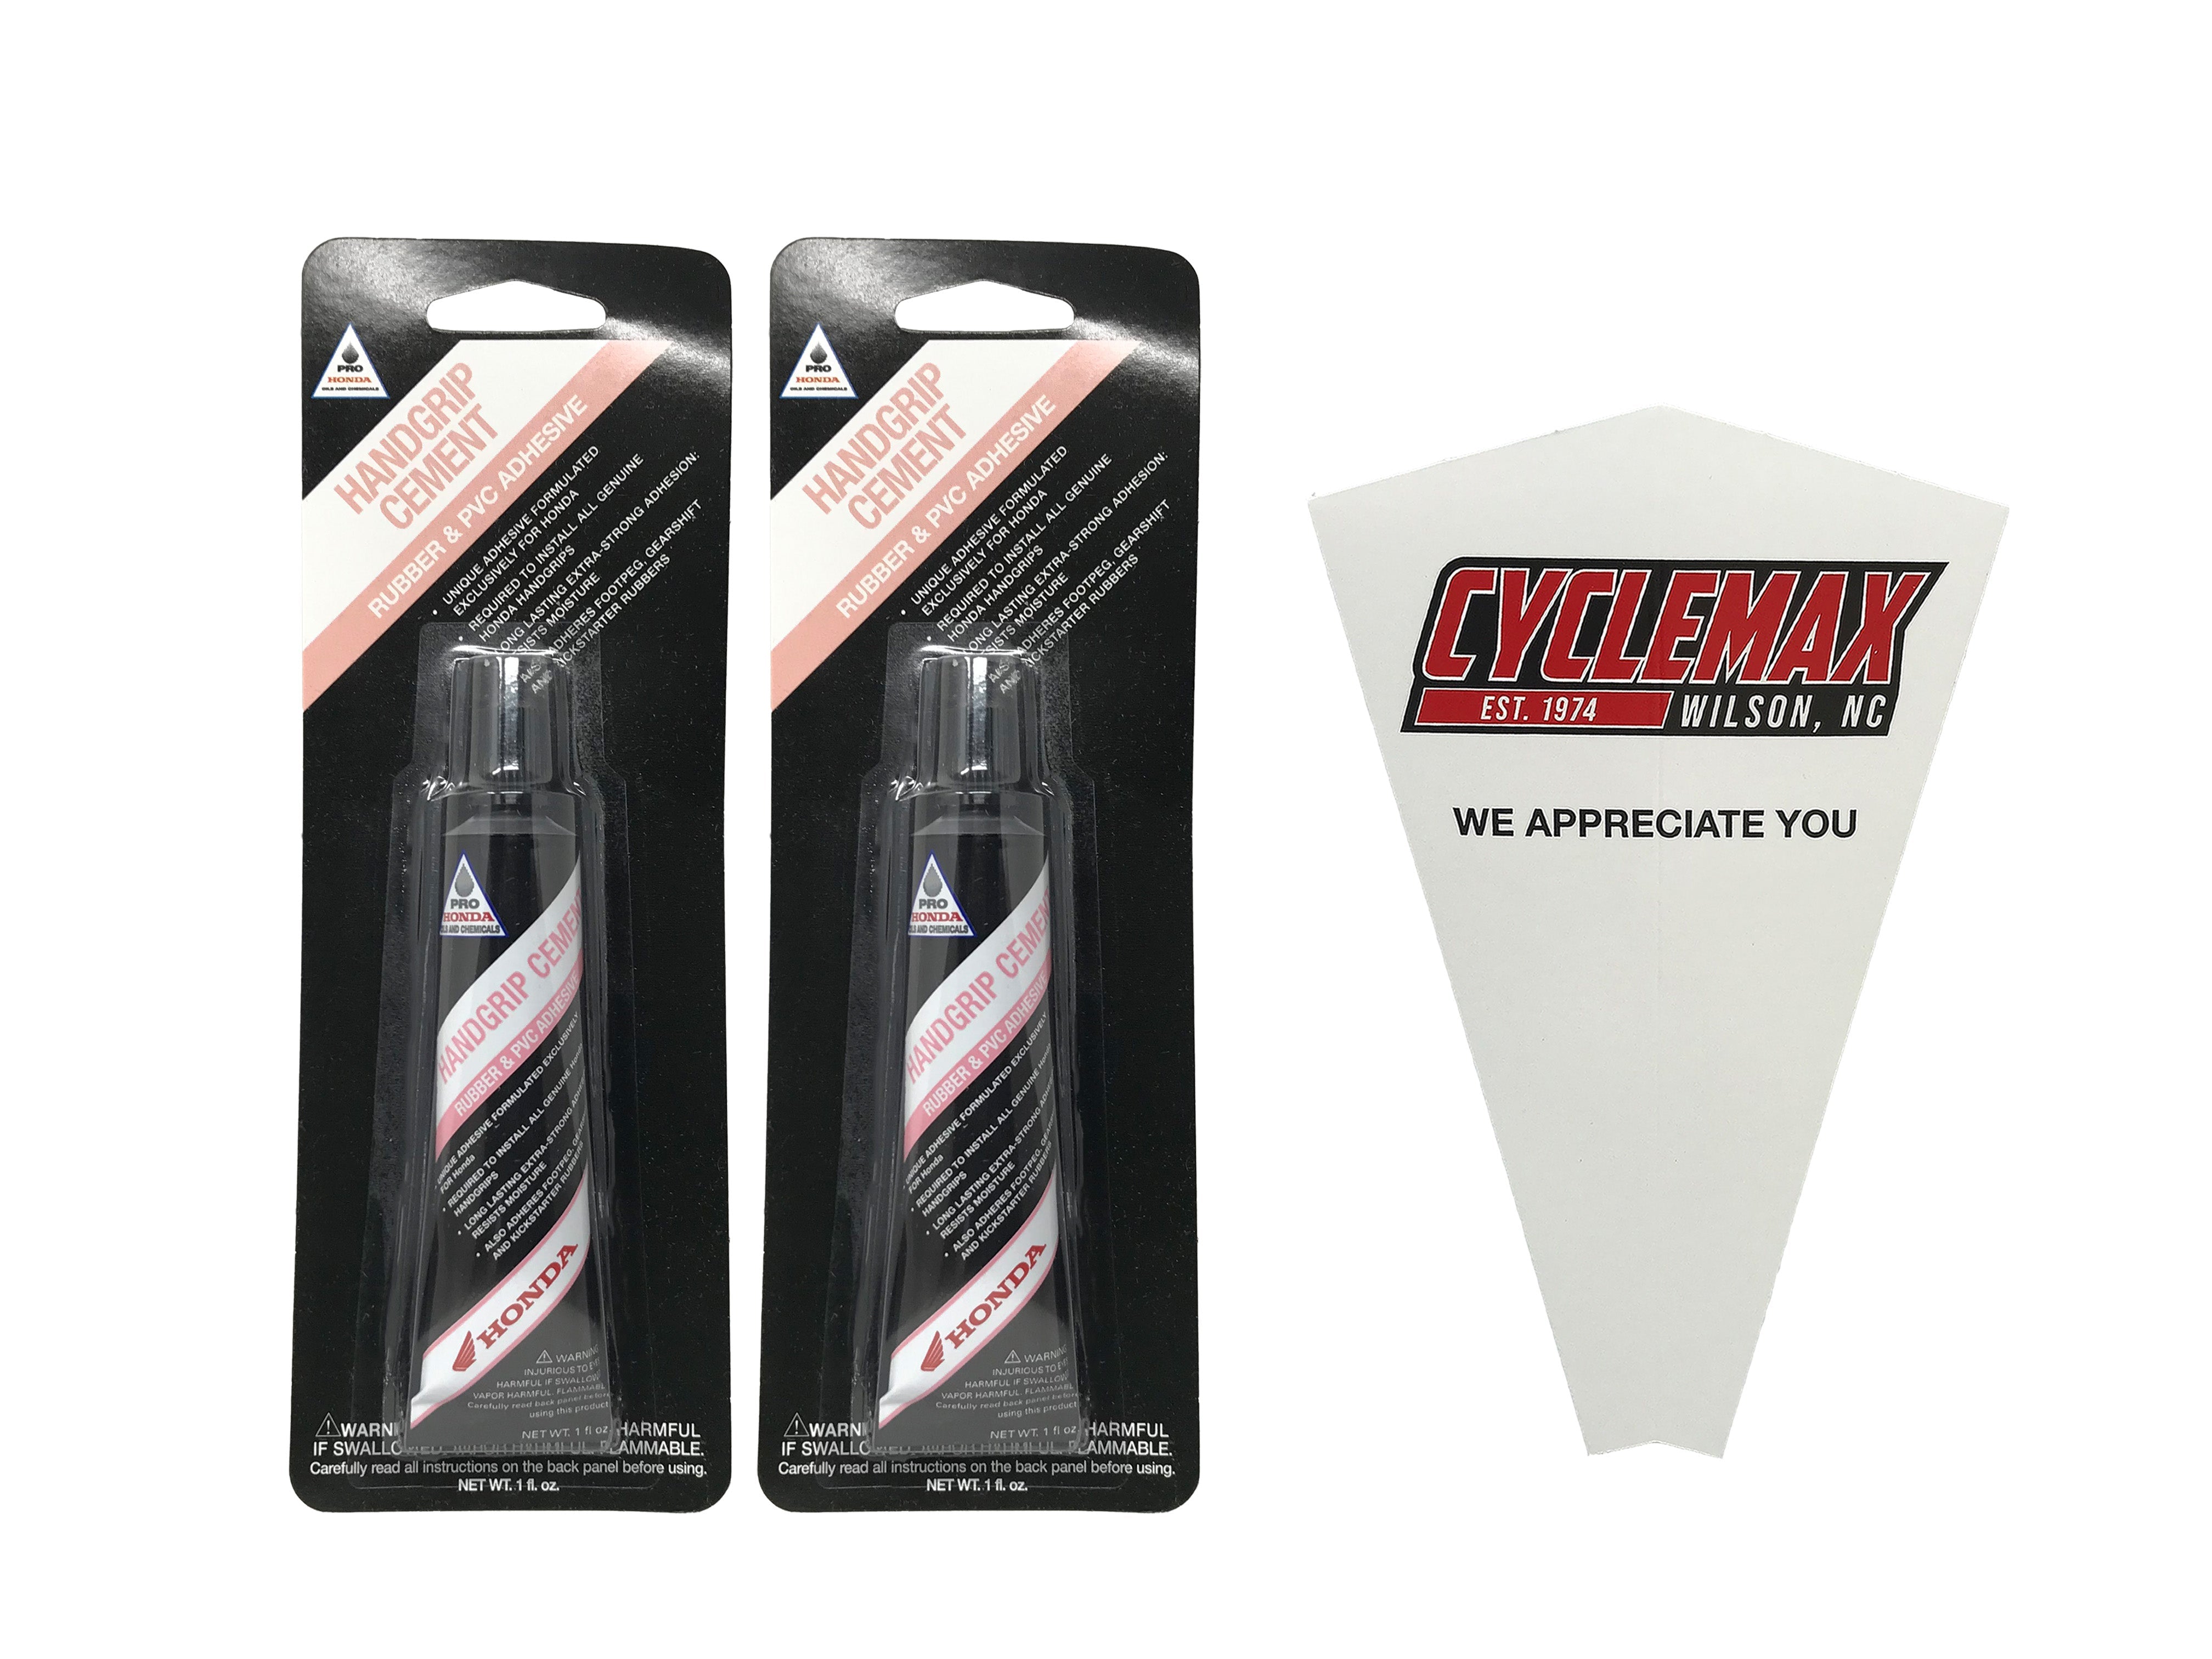 Cyclemax Two Pack for Honda Handgrip Cement Rubber & PVC Adhesive 08712-0001 Contains Two 1oz Tubes and a Funnel